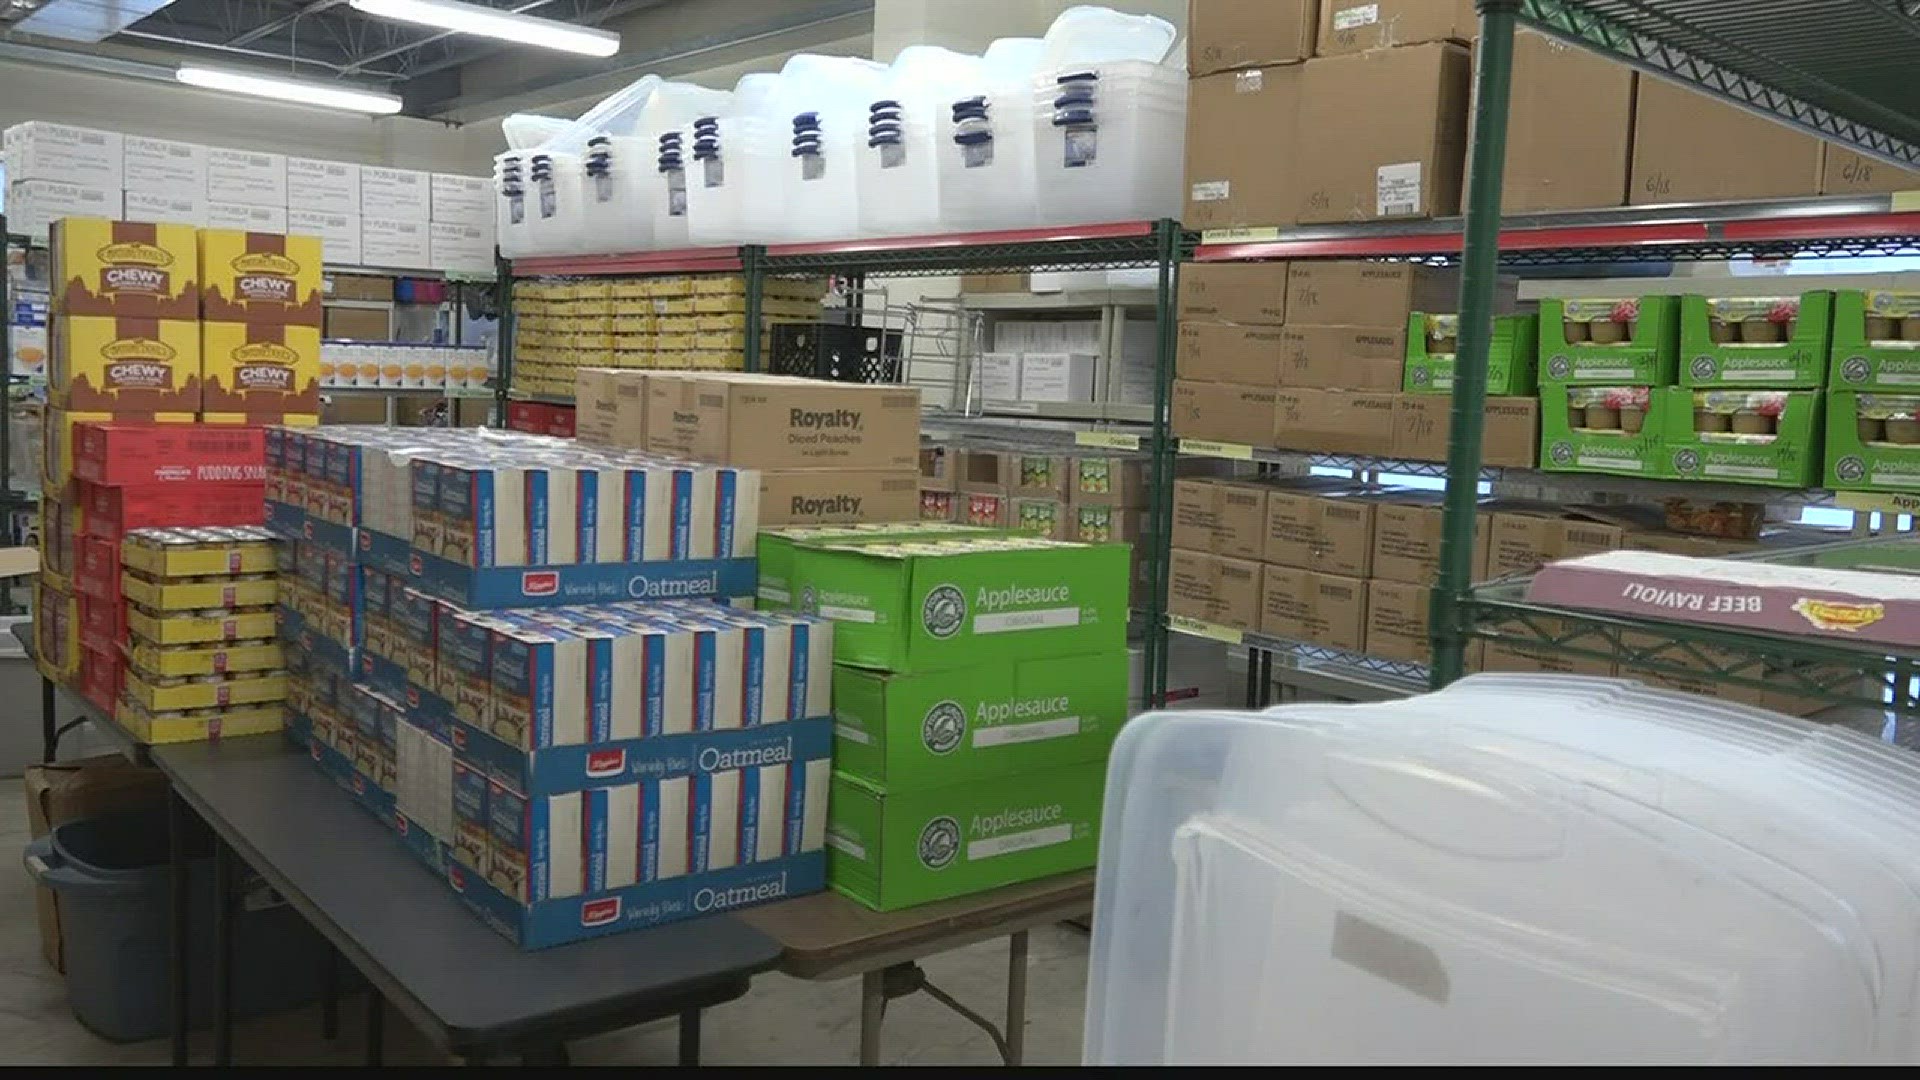 Many people are in need of food and supplies following Hurricane Irma. One food pantry is grateful for all the supplies donated by the community.